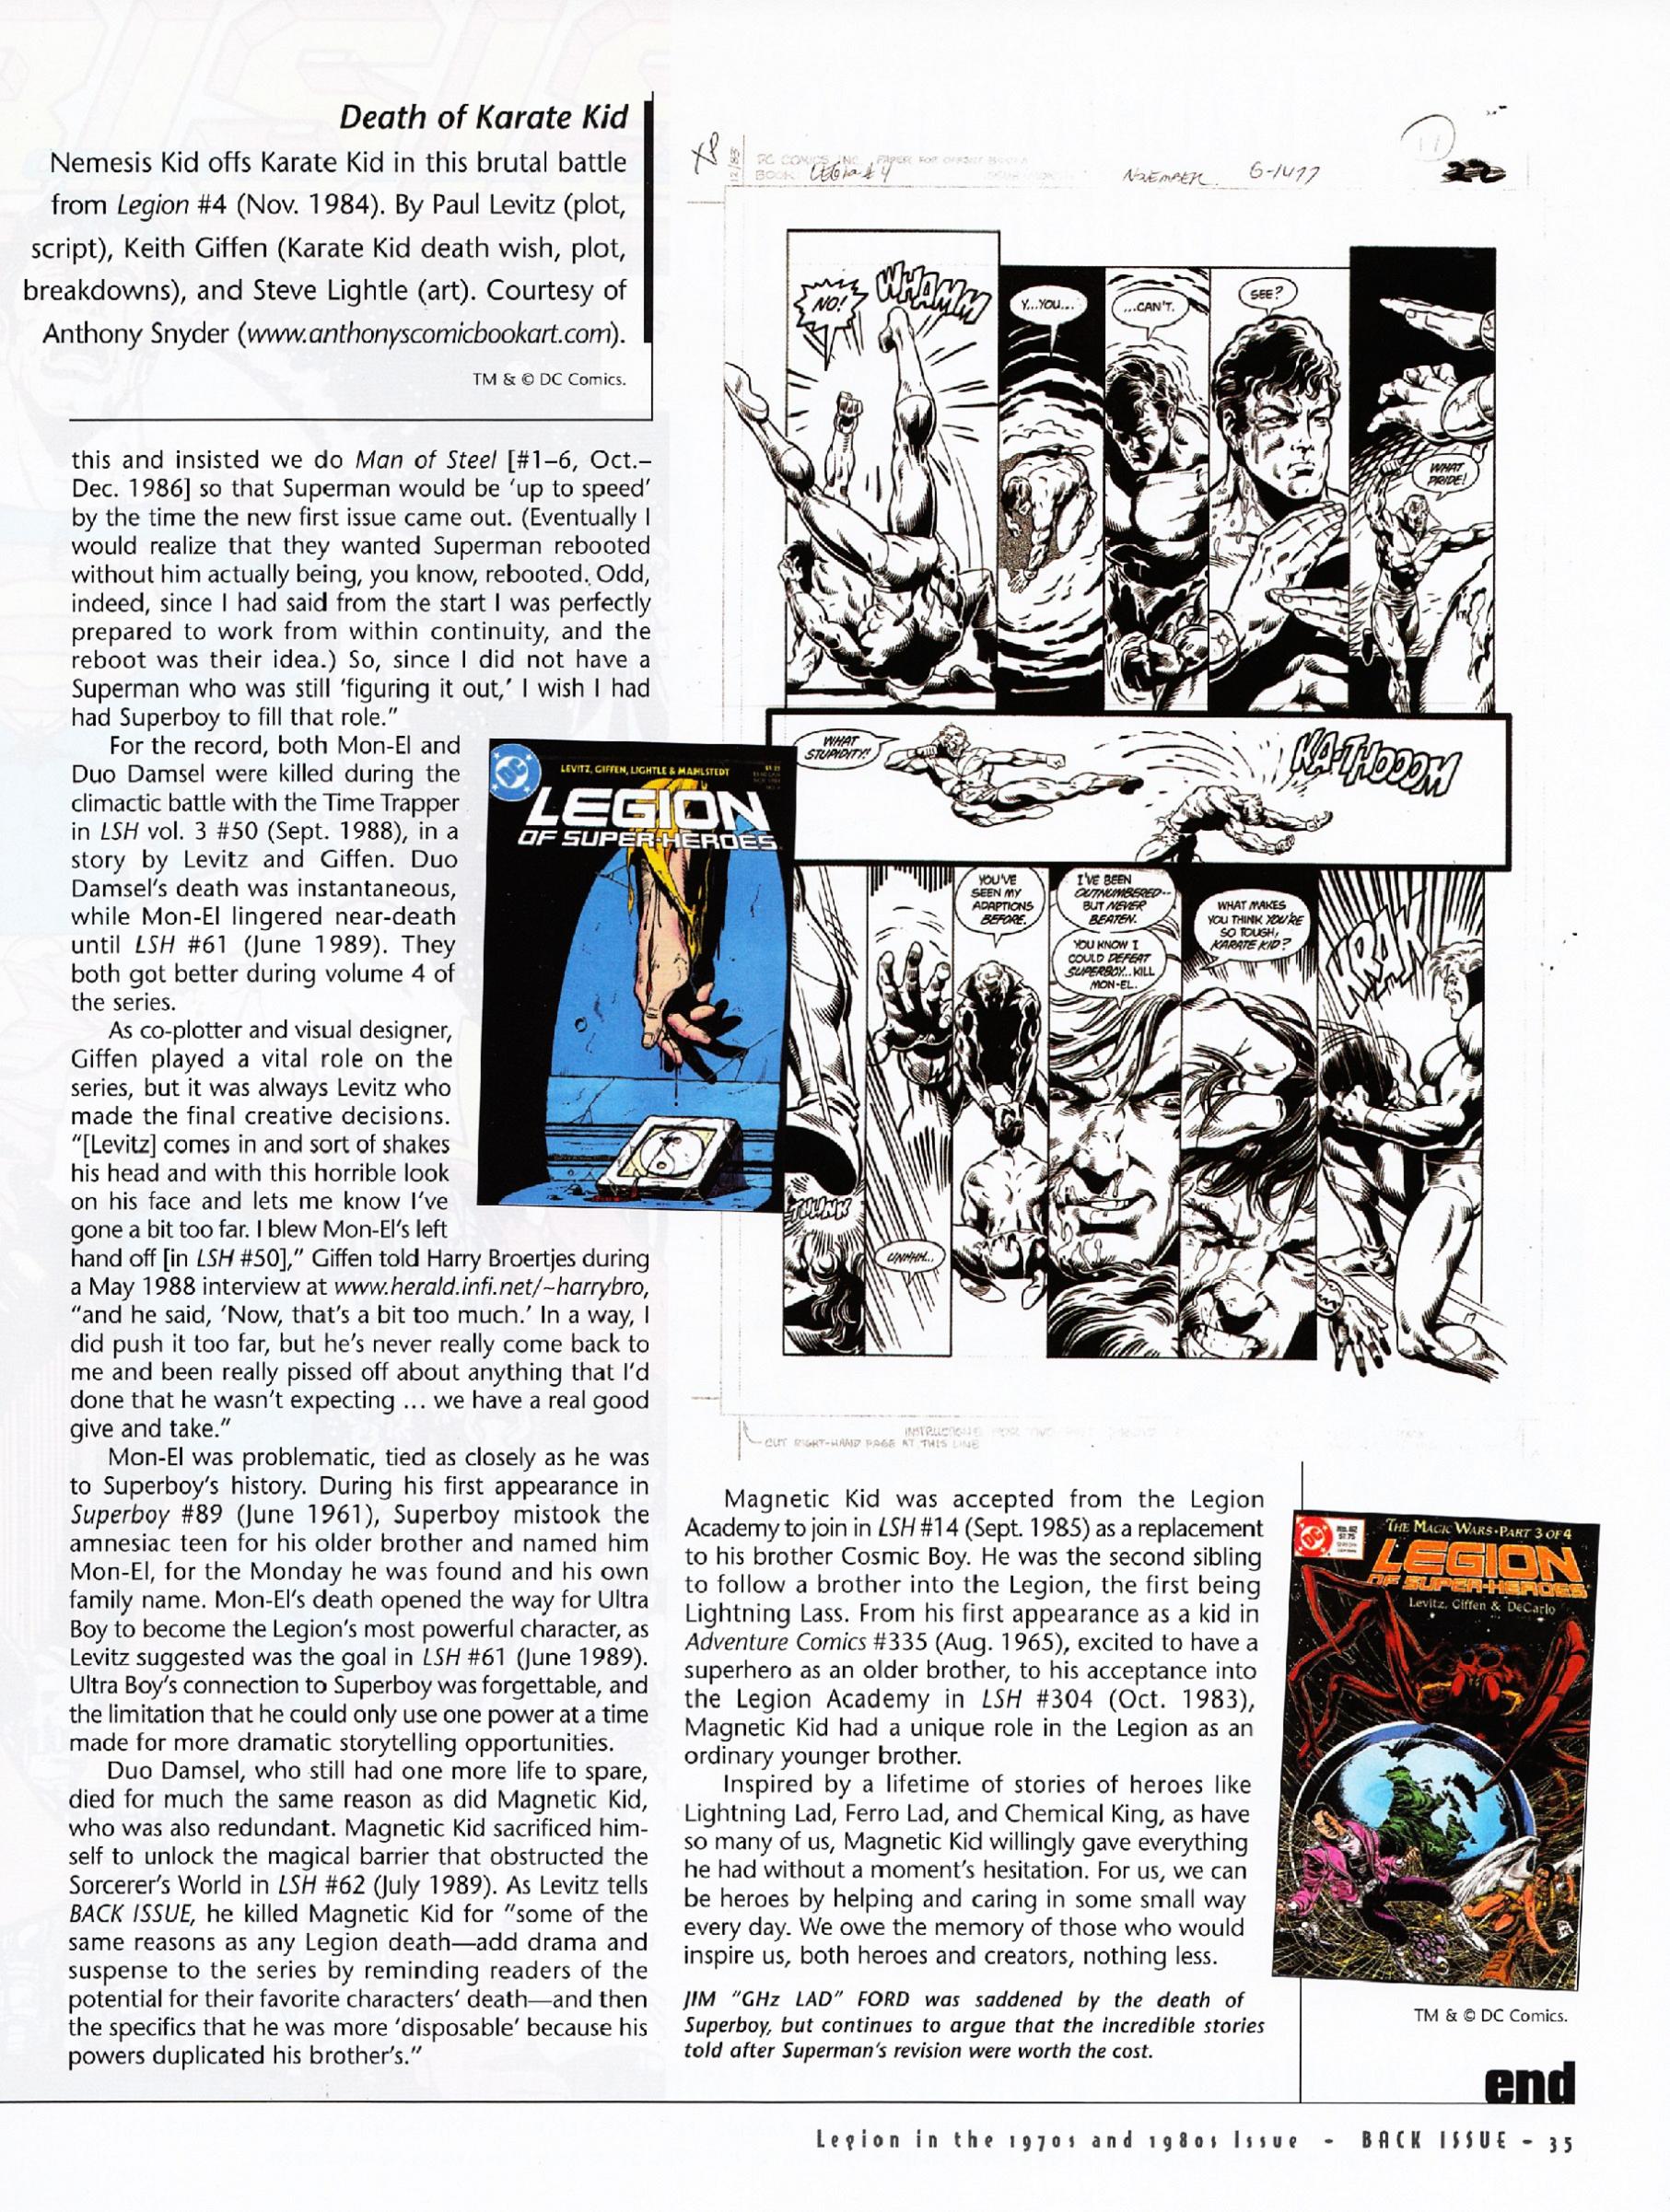 Read online Back Issue comic -  Issue #68 - 37